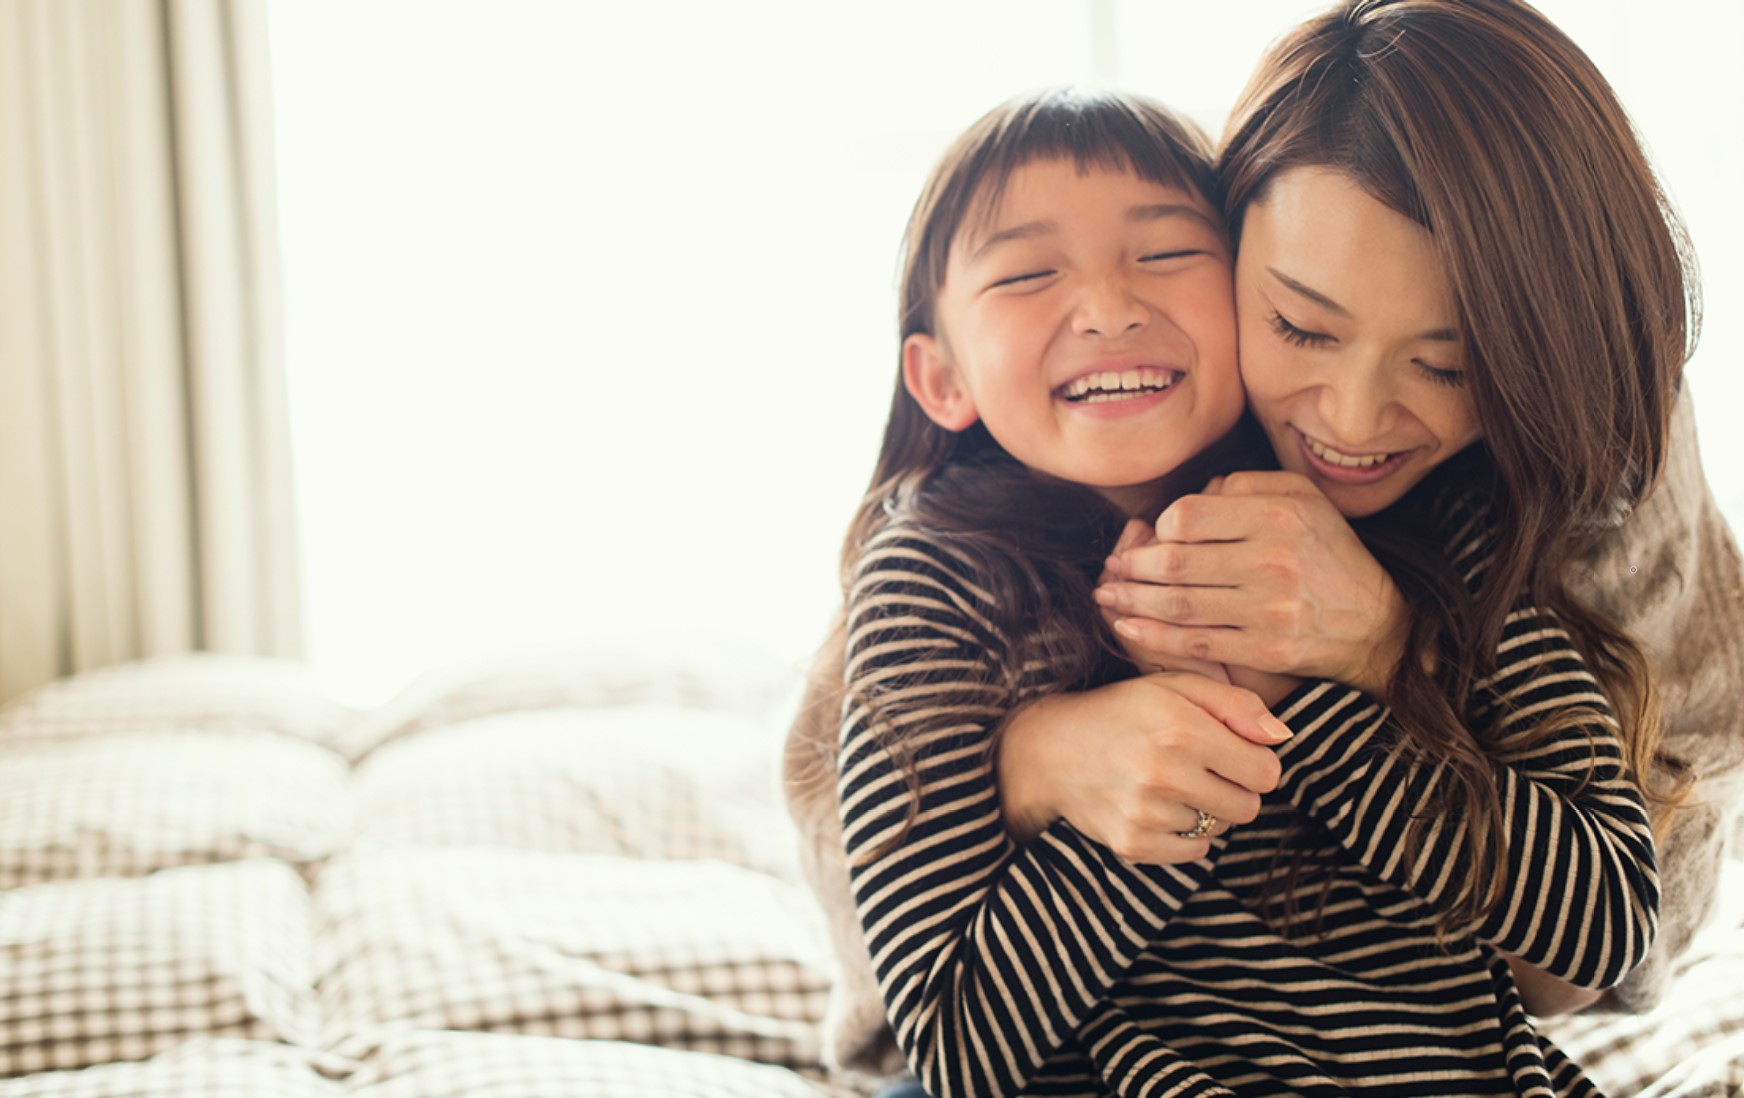 7 Fun Facts About Mother's Day